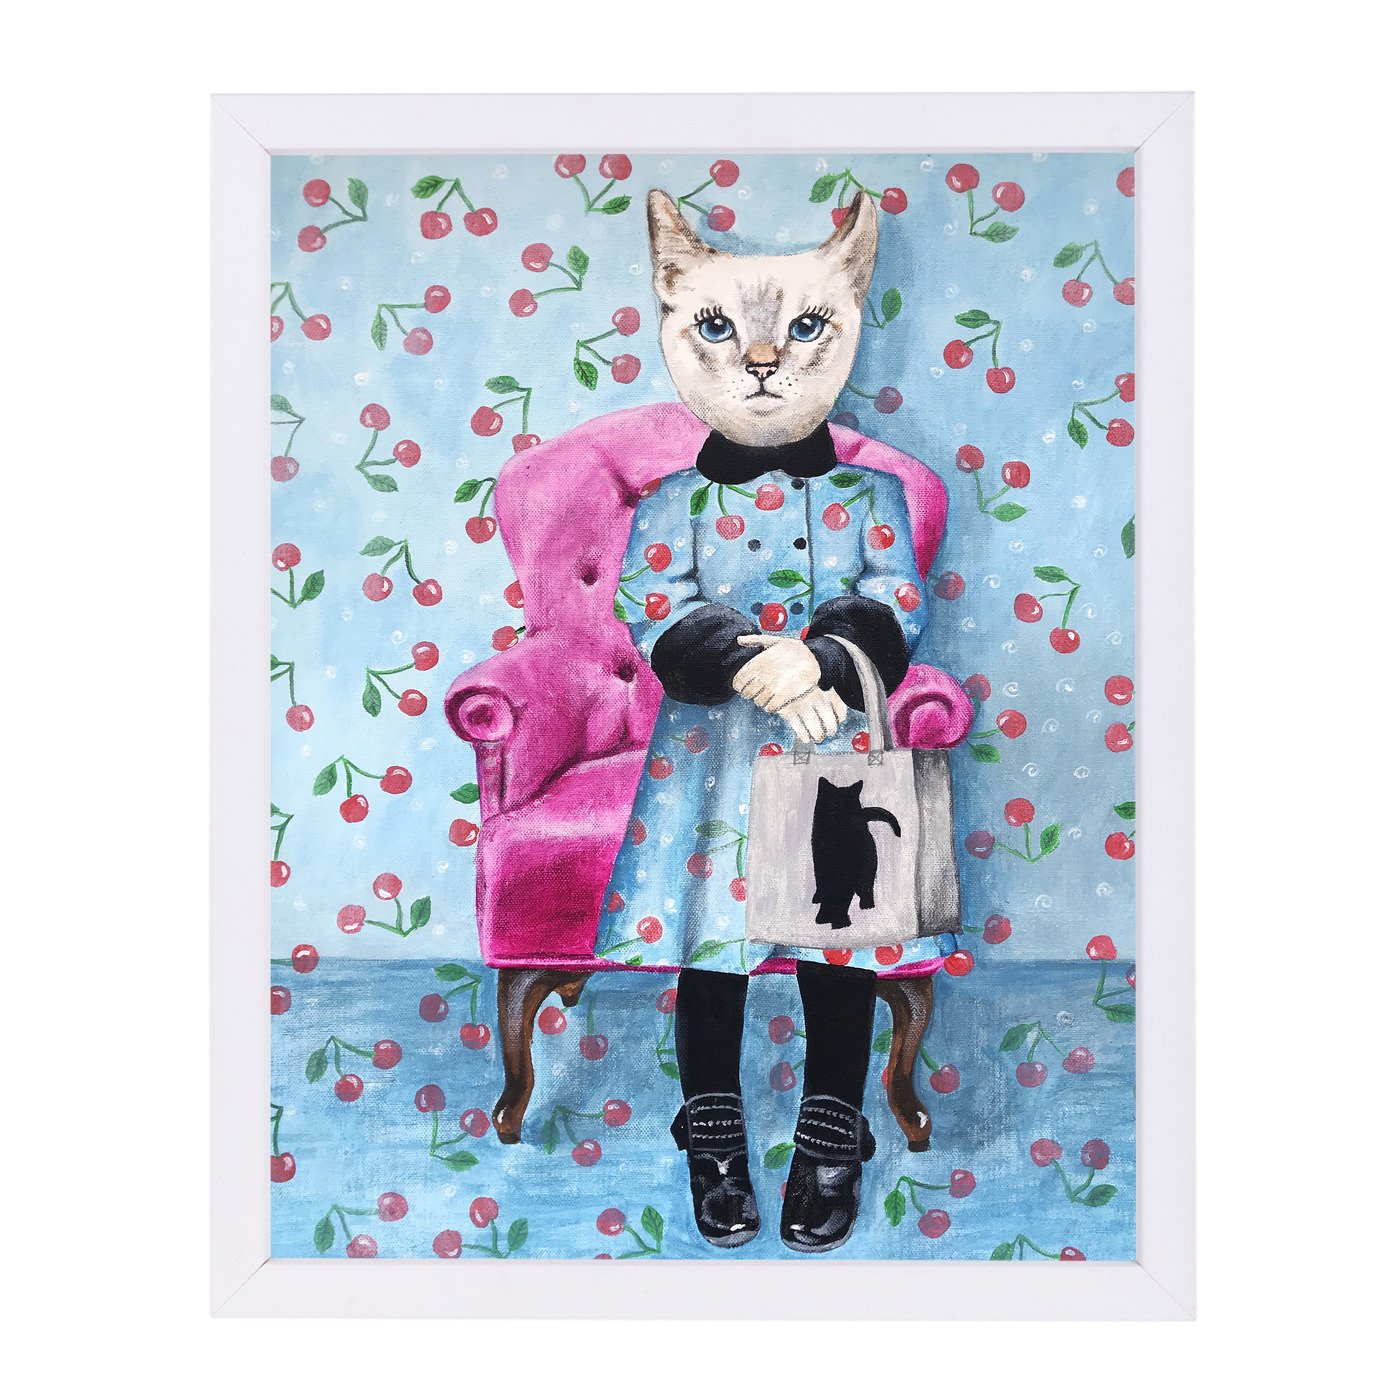 Cat With Cat Bag By Coco De Paris - Framed Print - Americanflat